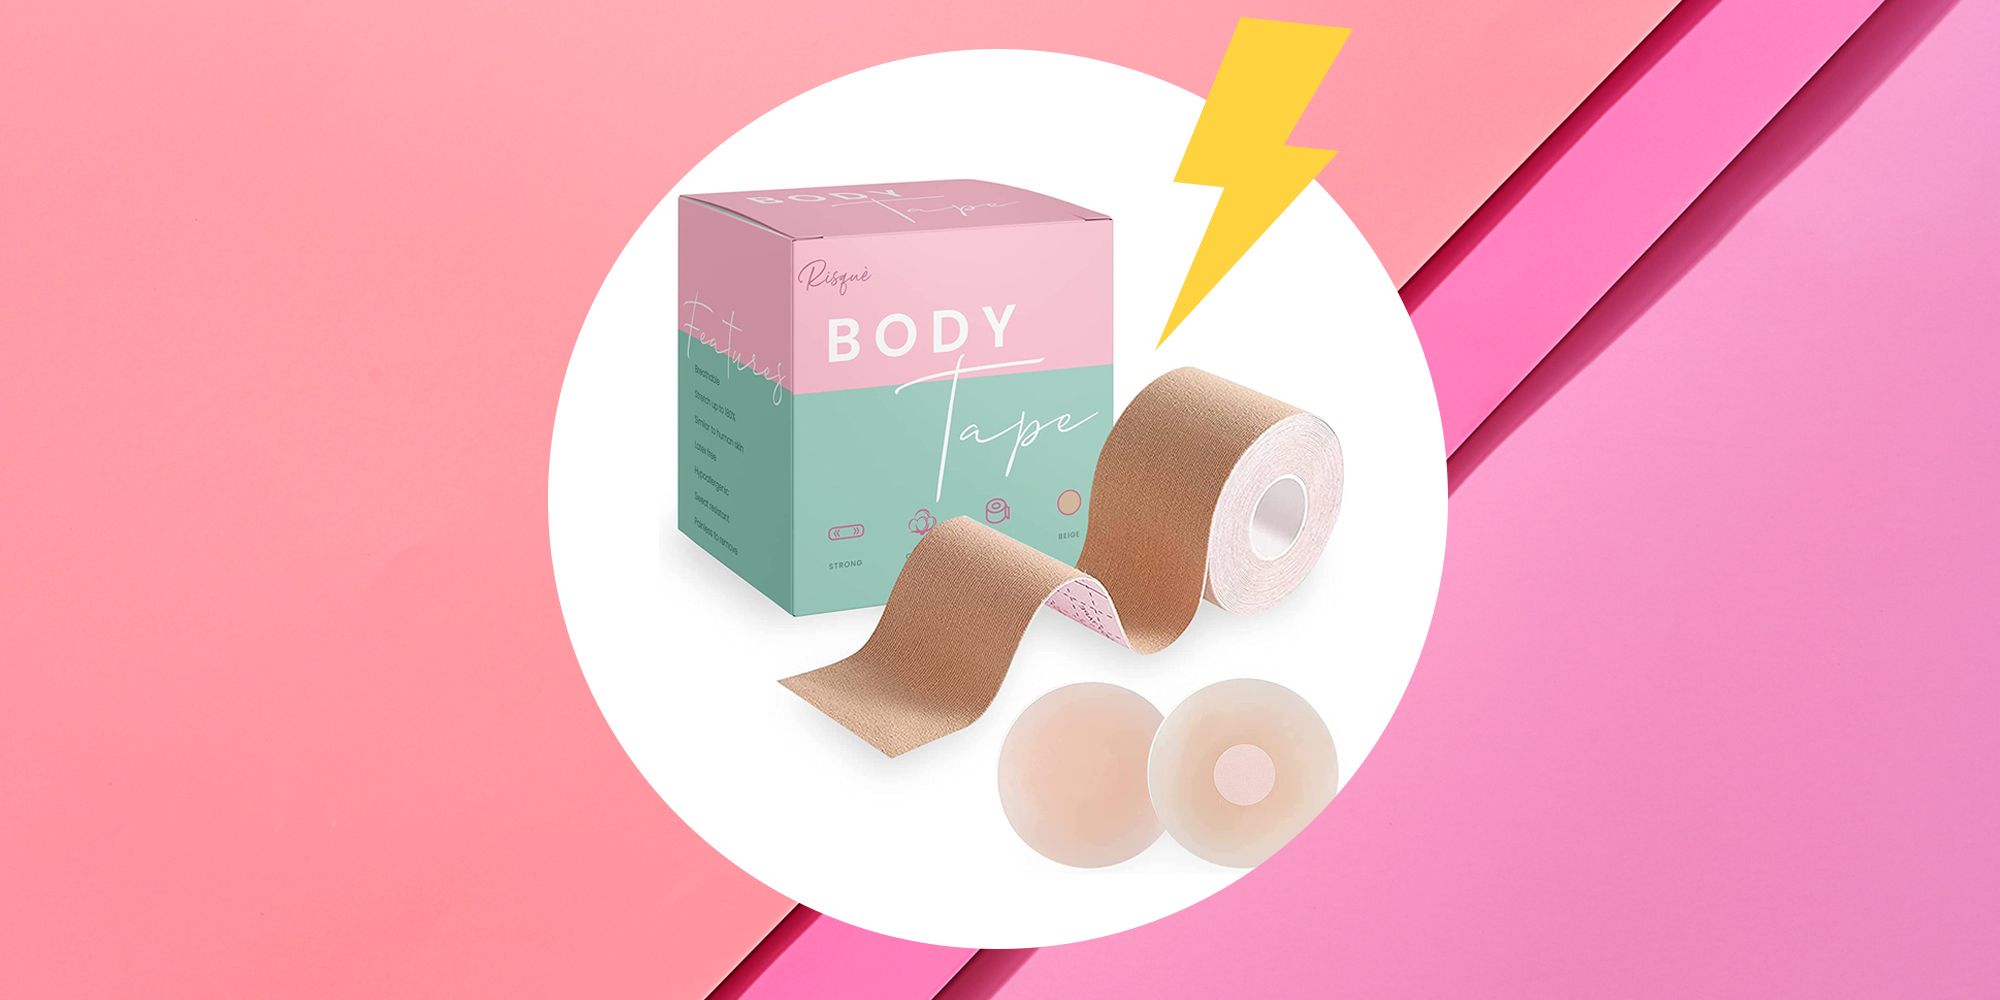 Boob tape that doesnt budge and is big bust friendly - Yes Please! Sh